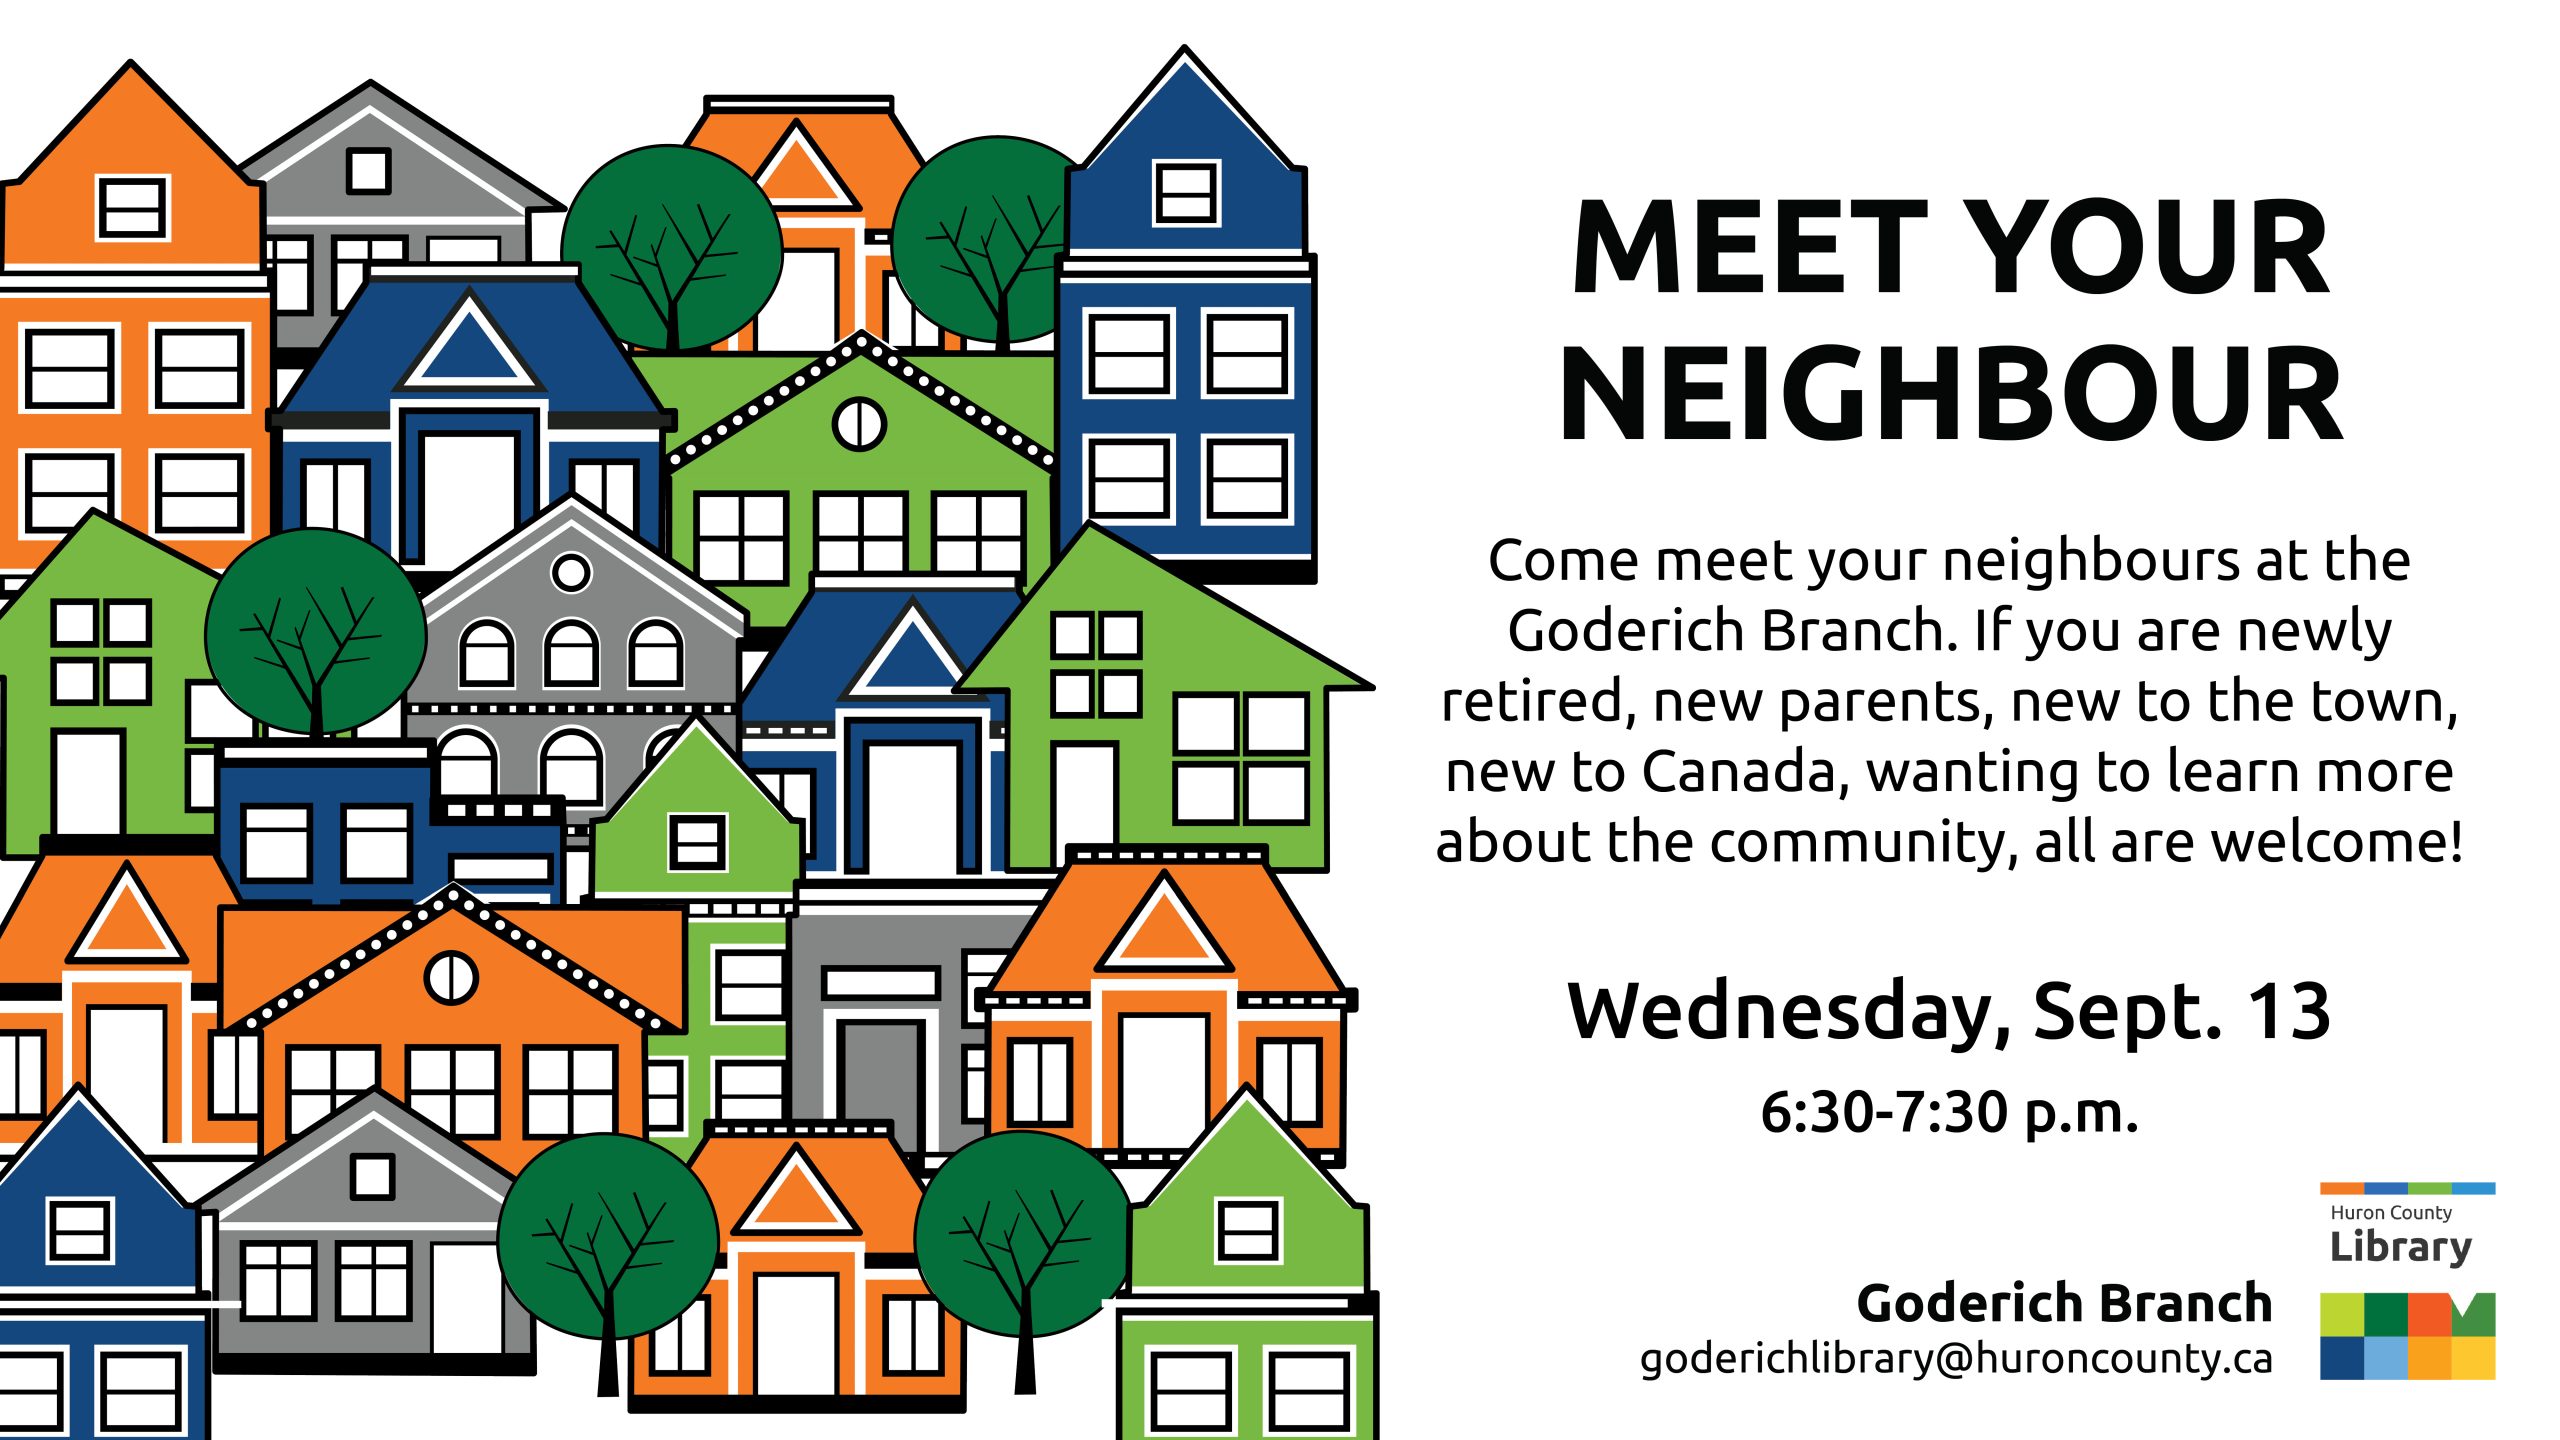 Illustration of a neighbourhood of homes with text promoting Meet Your Neighbour at Goderich Branch